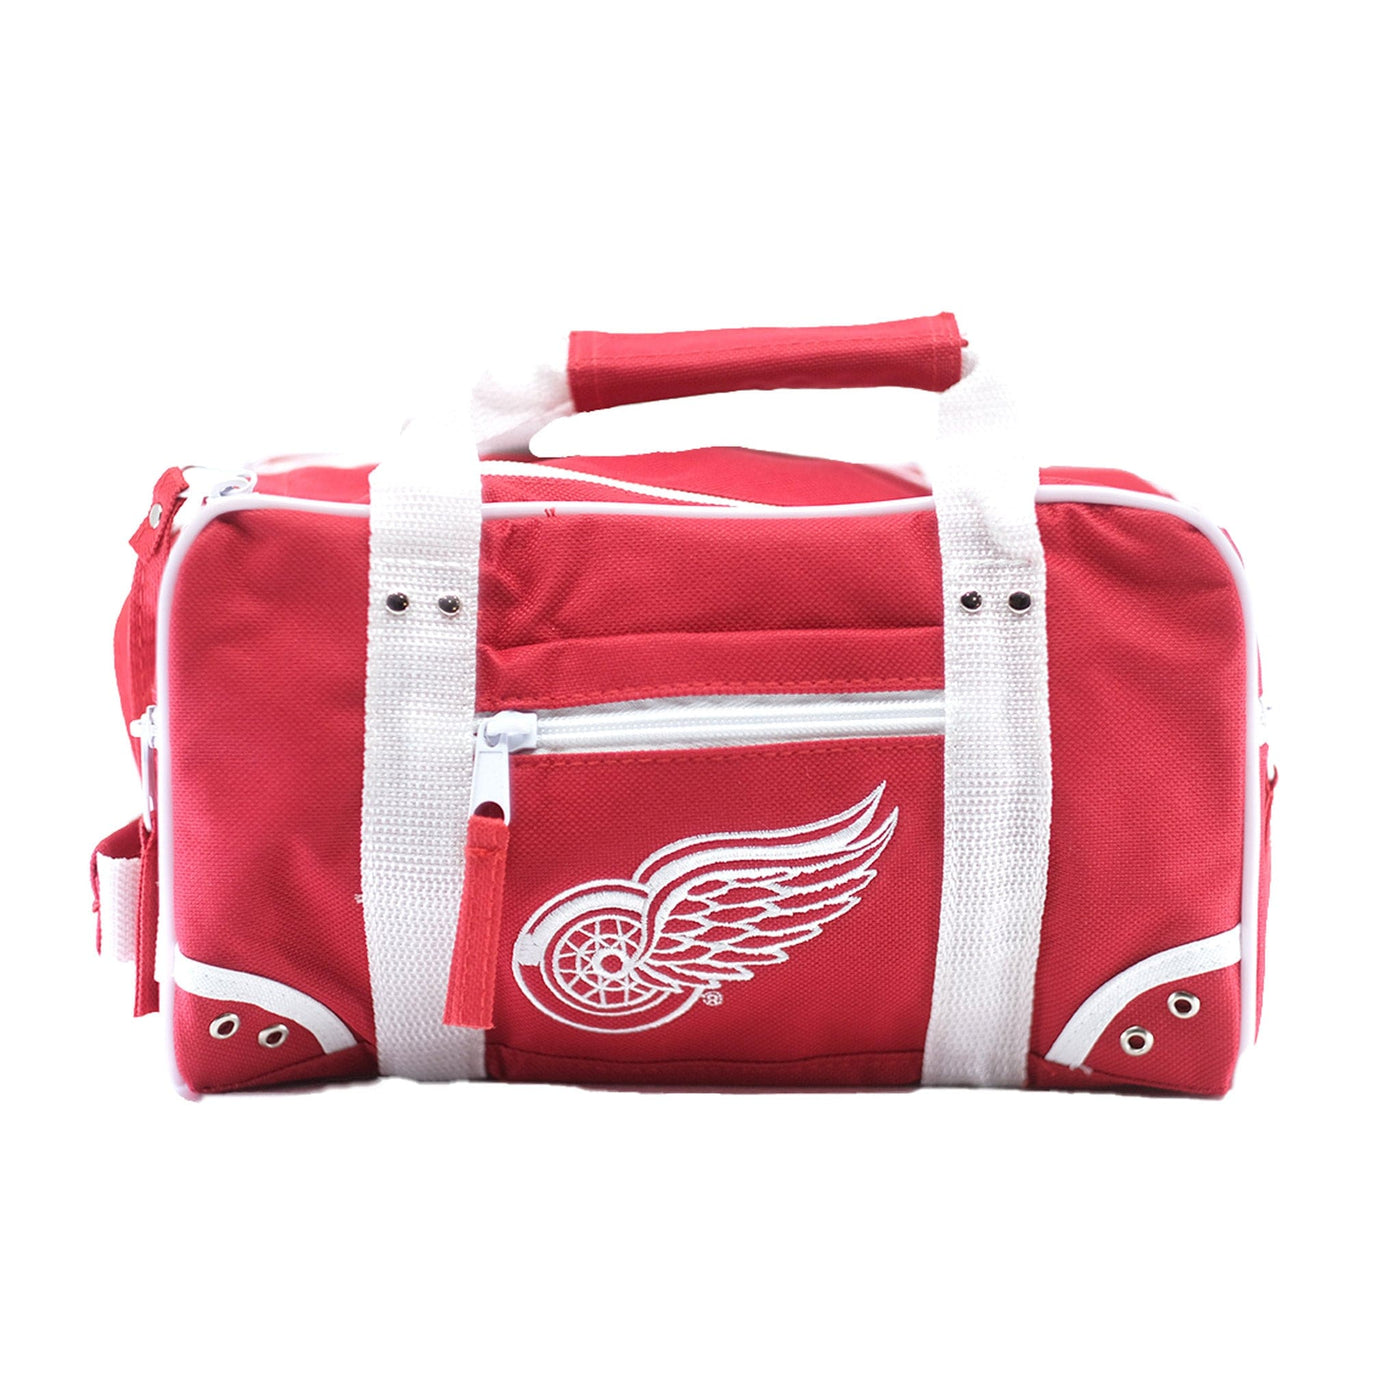 Detroit Red Wings Ultimate Sports Kit NHL Toiletry Bag - The Hockey Shop Source For Sports